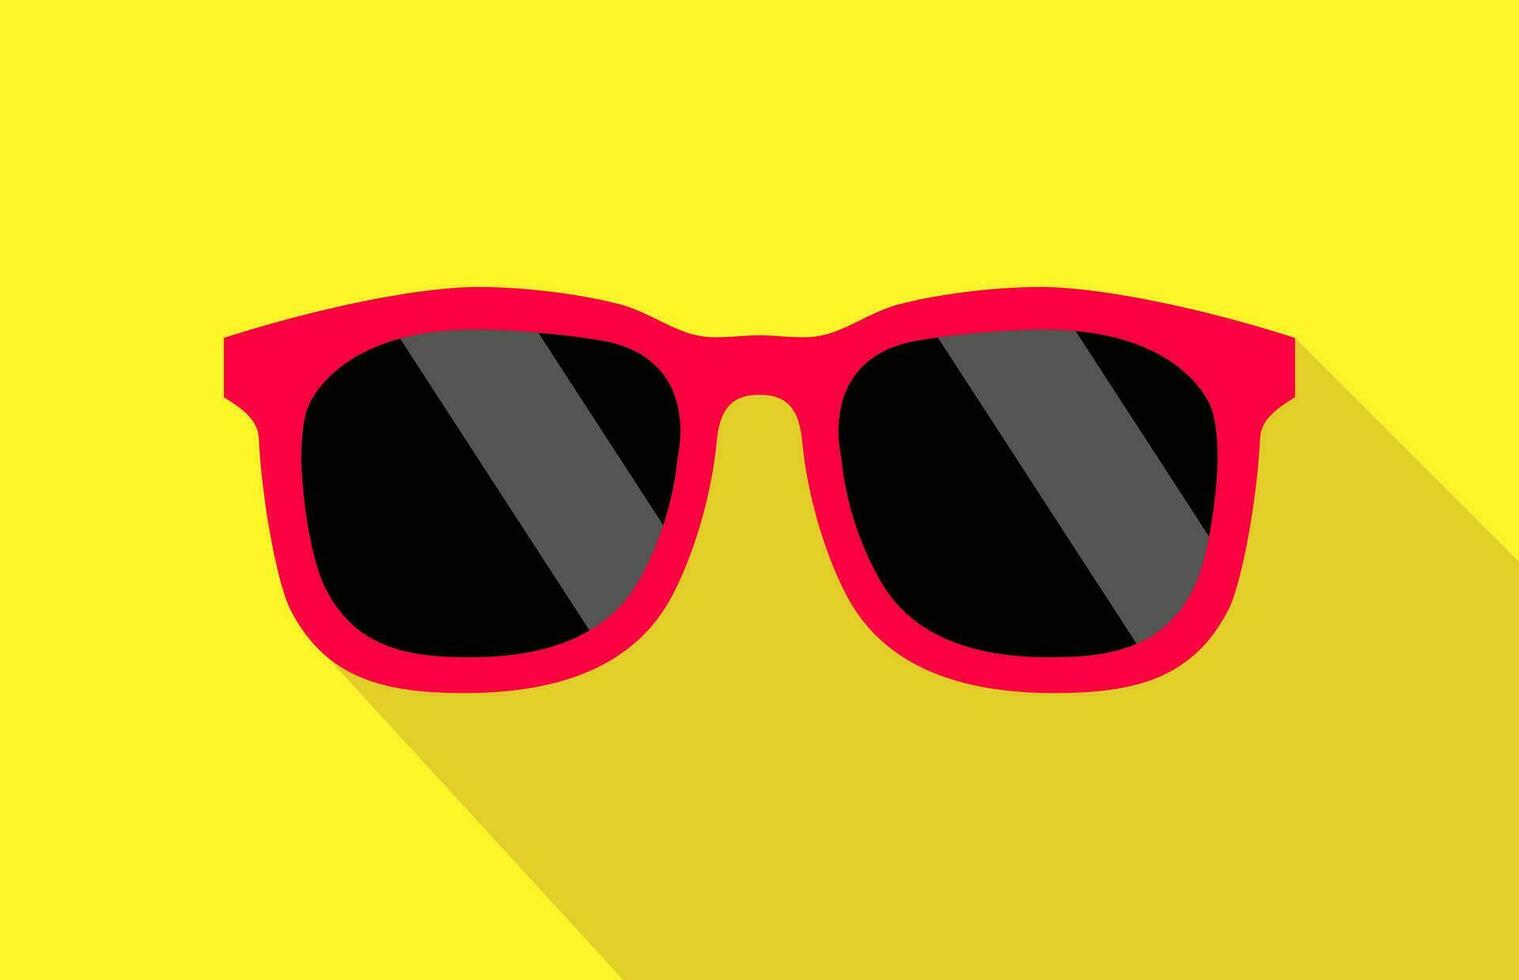 Cool Red Black Glasses Shadow Yellow Background Vector Illustration